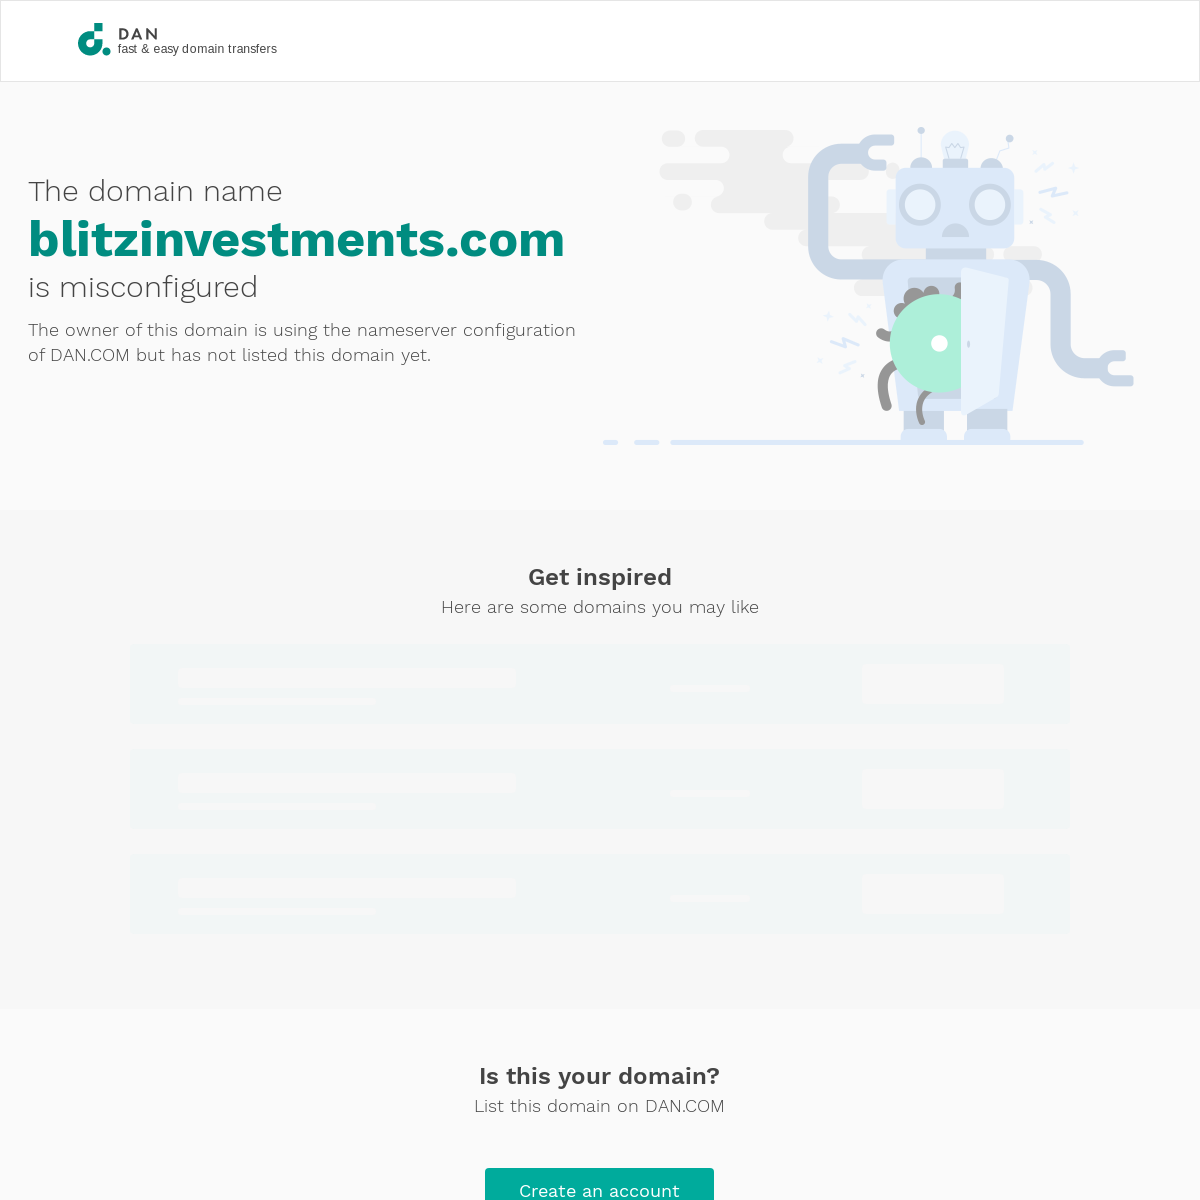 A complete backup of blitzinvestments.com